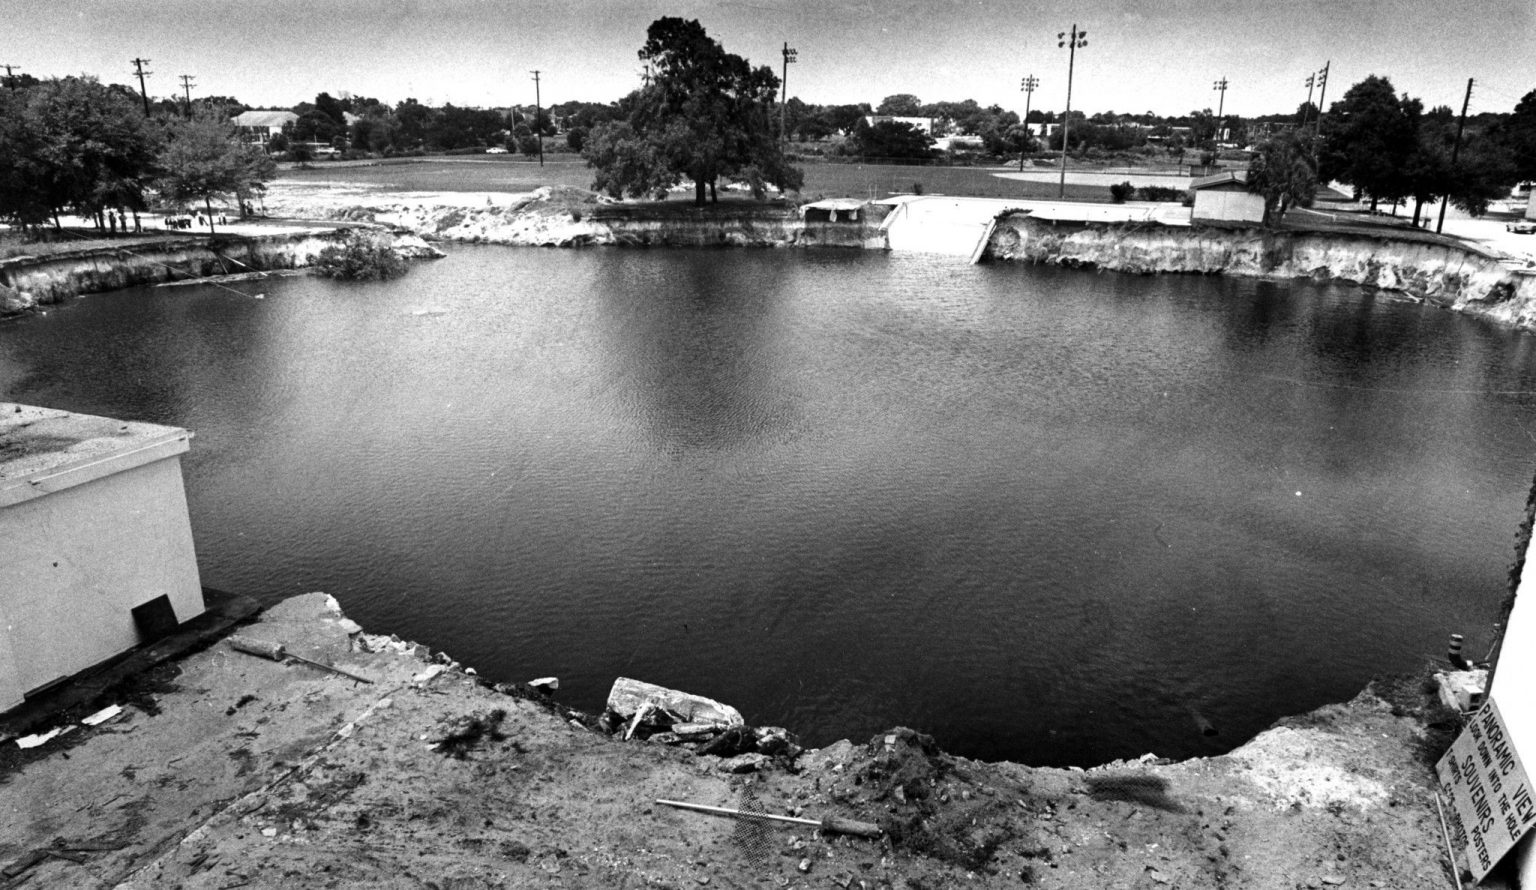 Winter Park Sinkhole How Would You Feel 1981 Truly Left Us In Shock